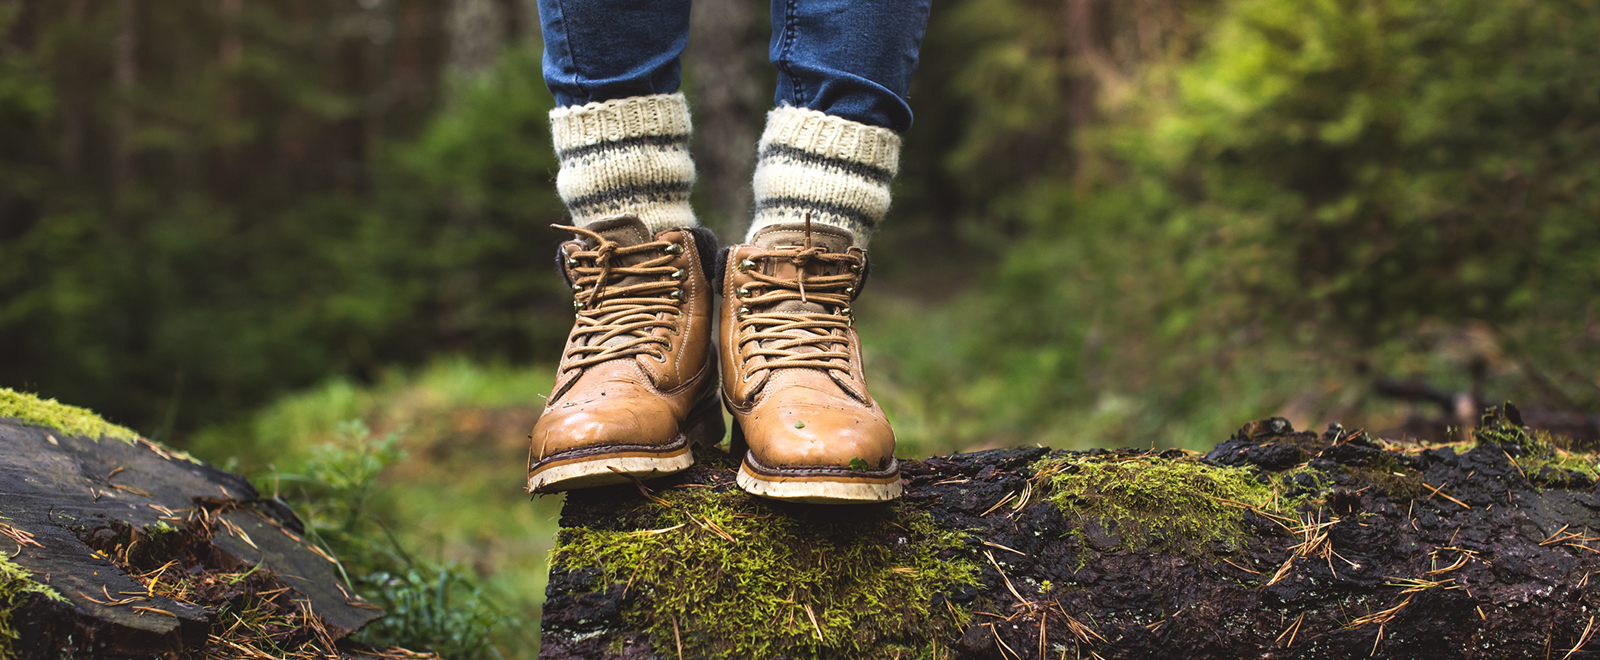 Hiking boots on a mossy log